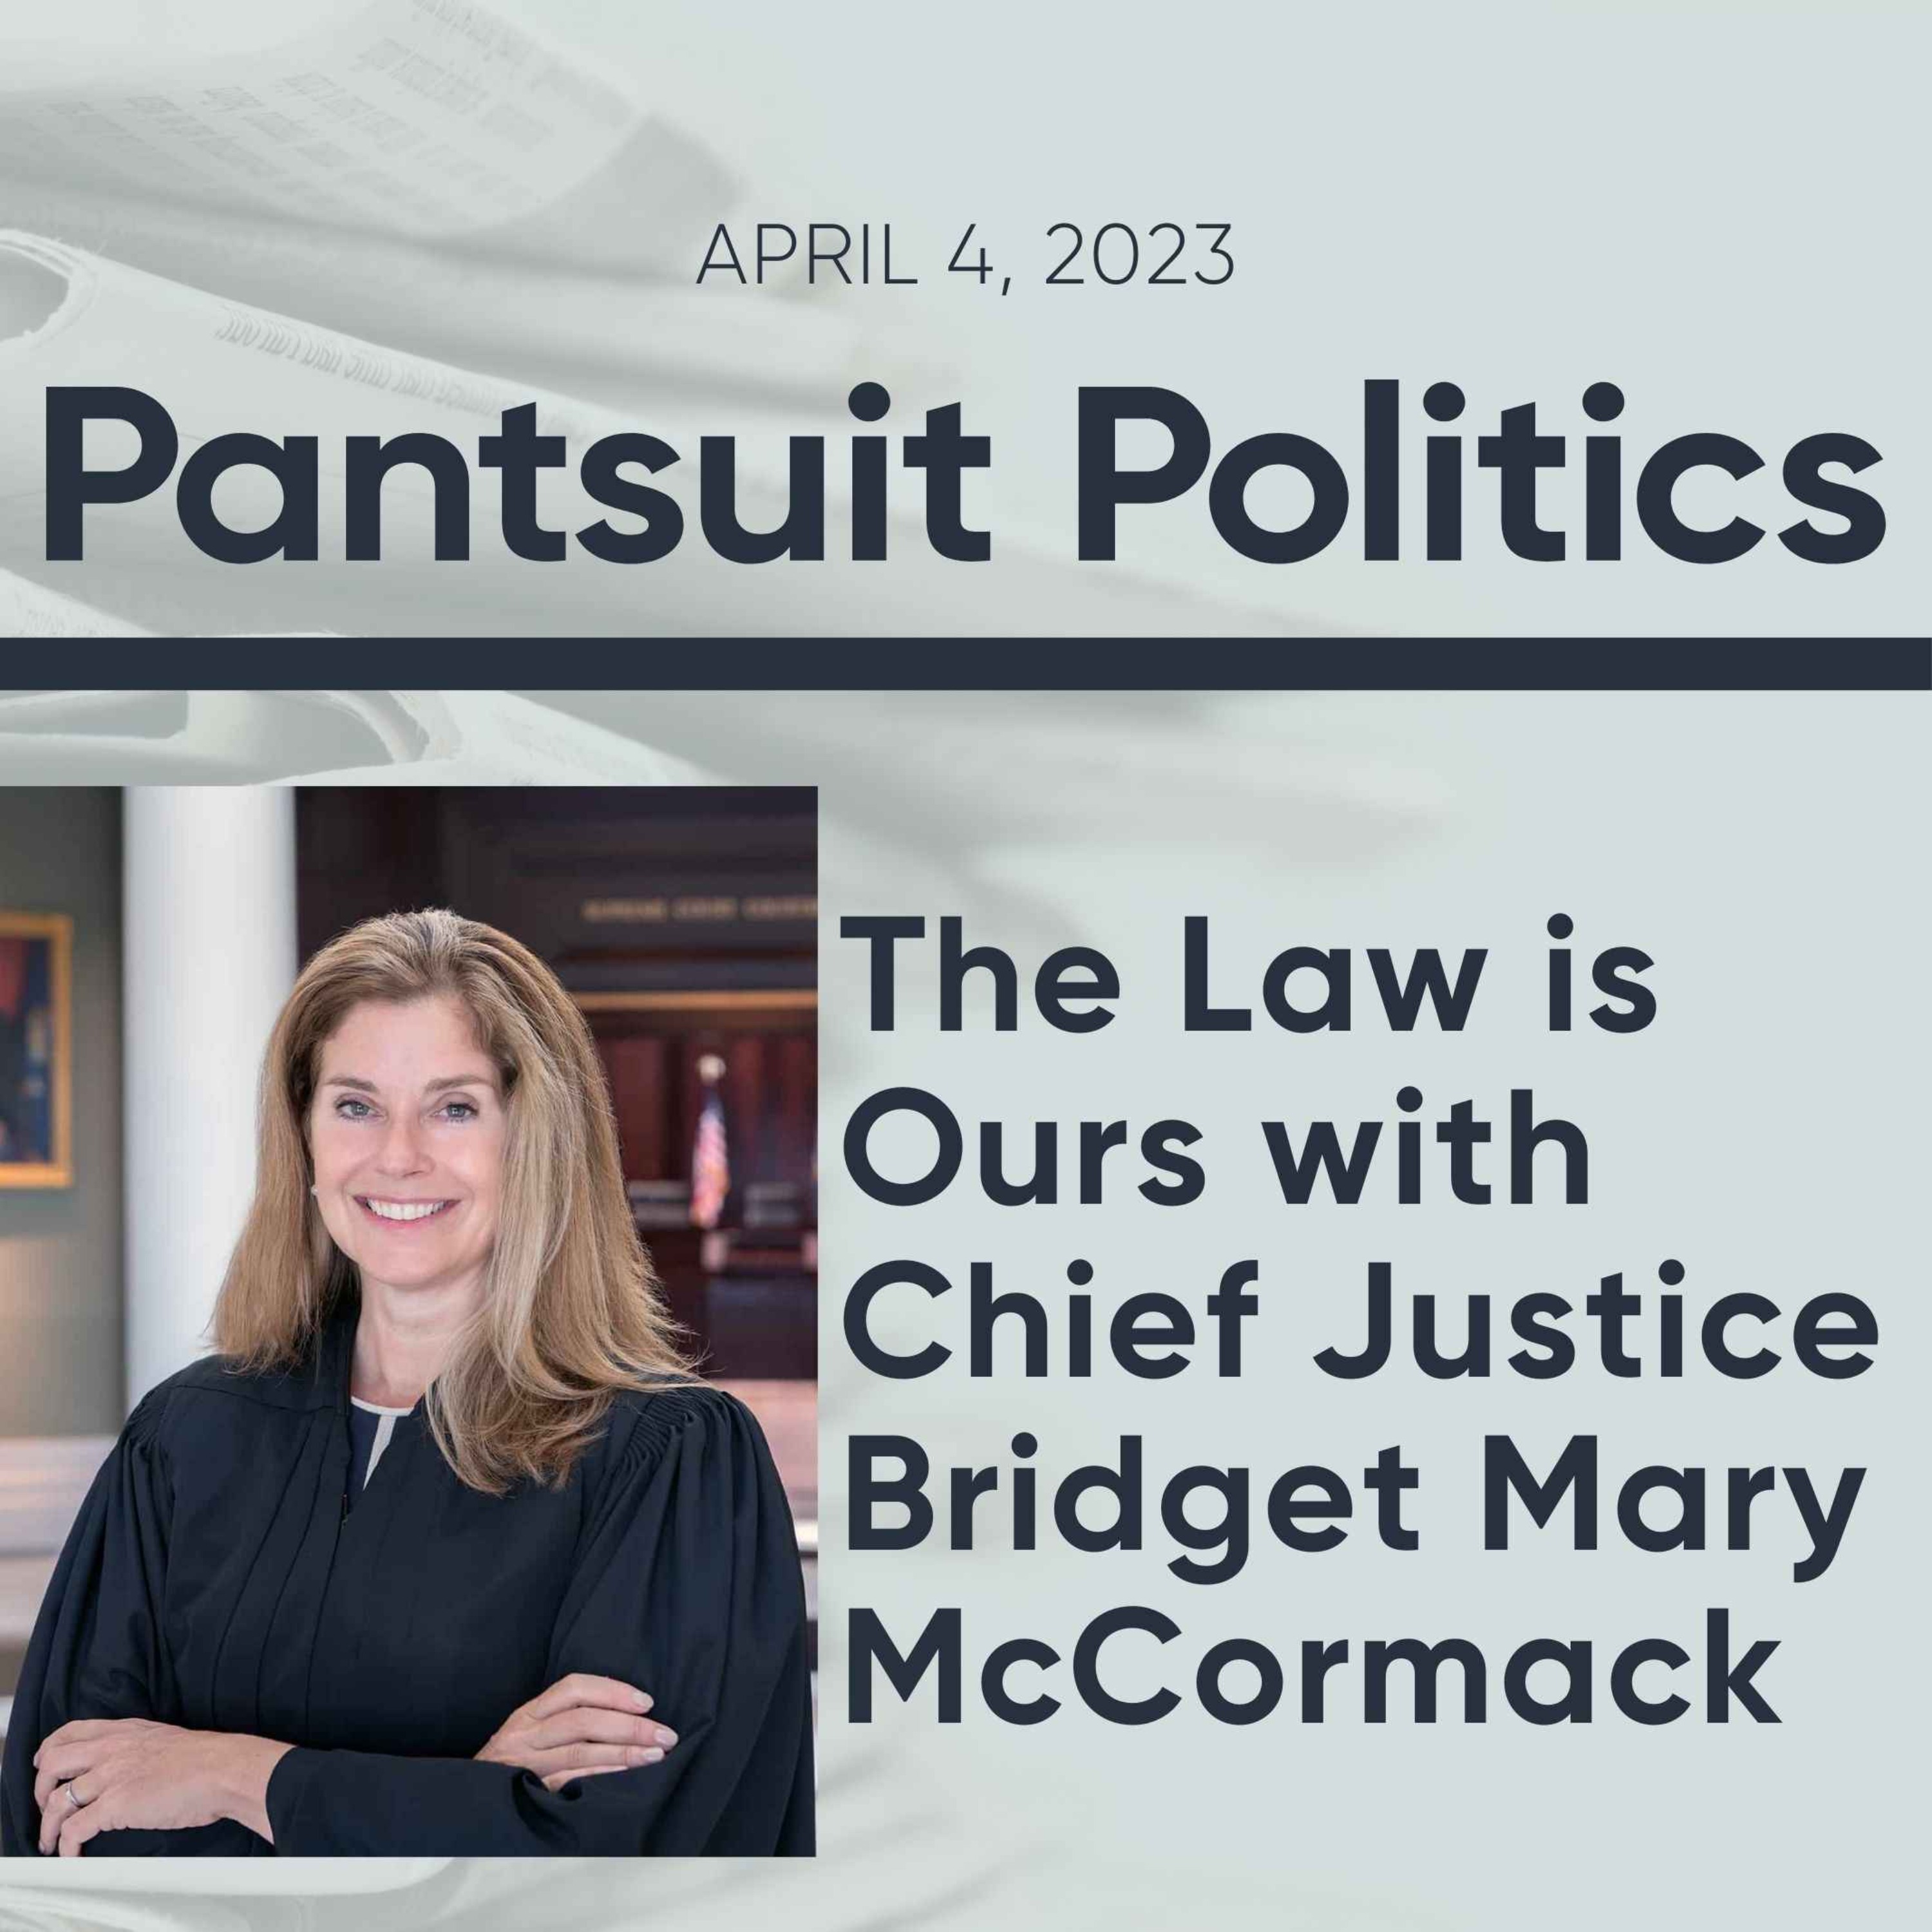 The Law is Ours with Chief Justice Bridget Mary McCormack